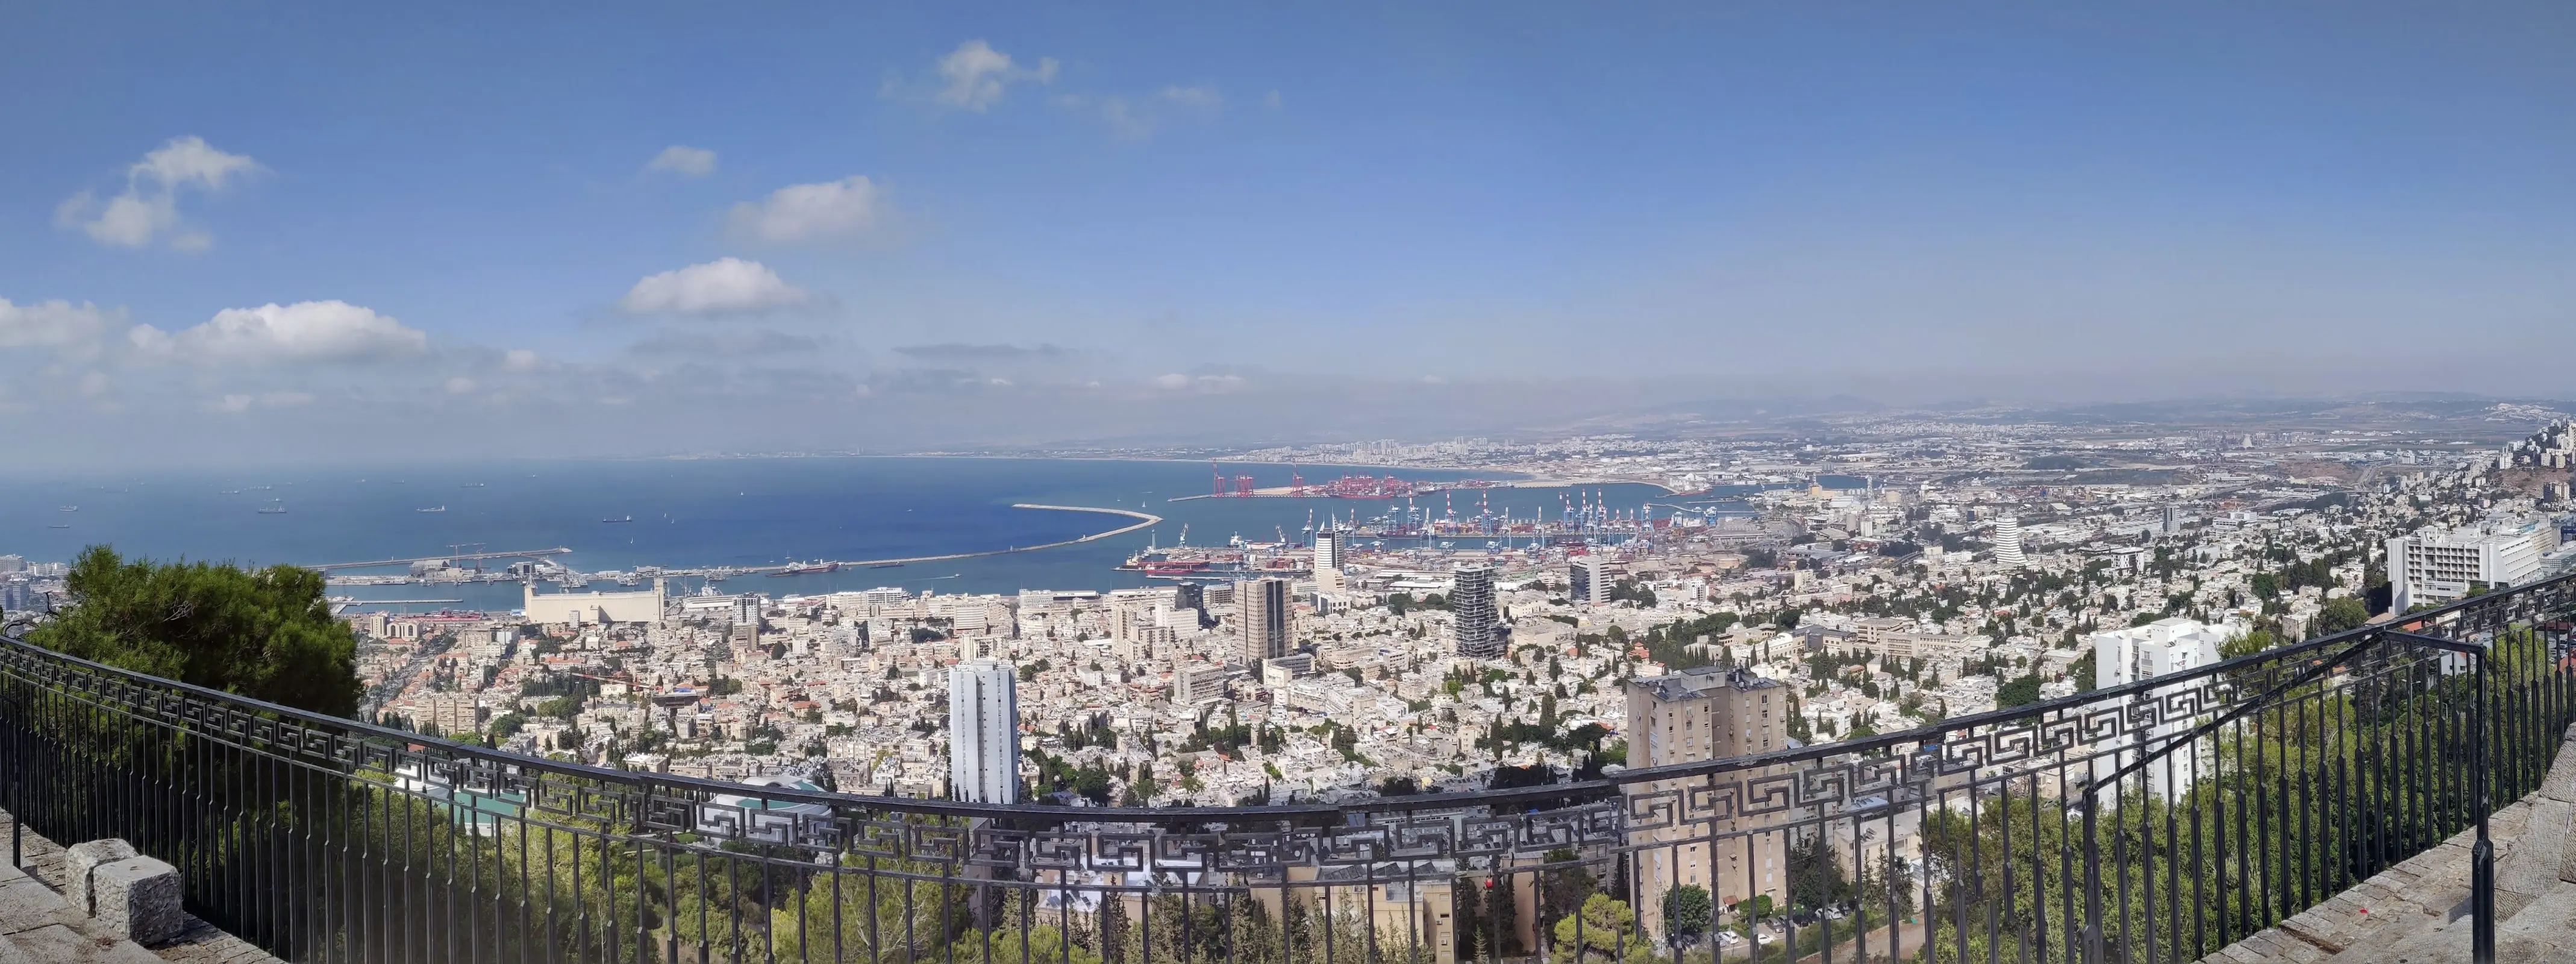 A panorama of the city of Haifa and the port